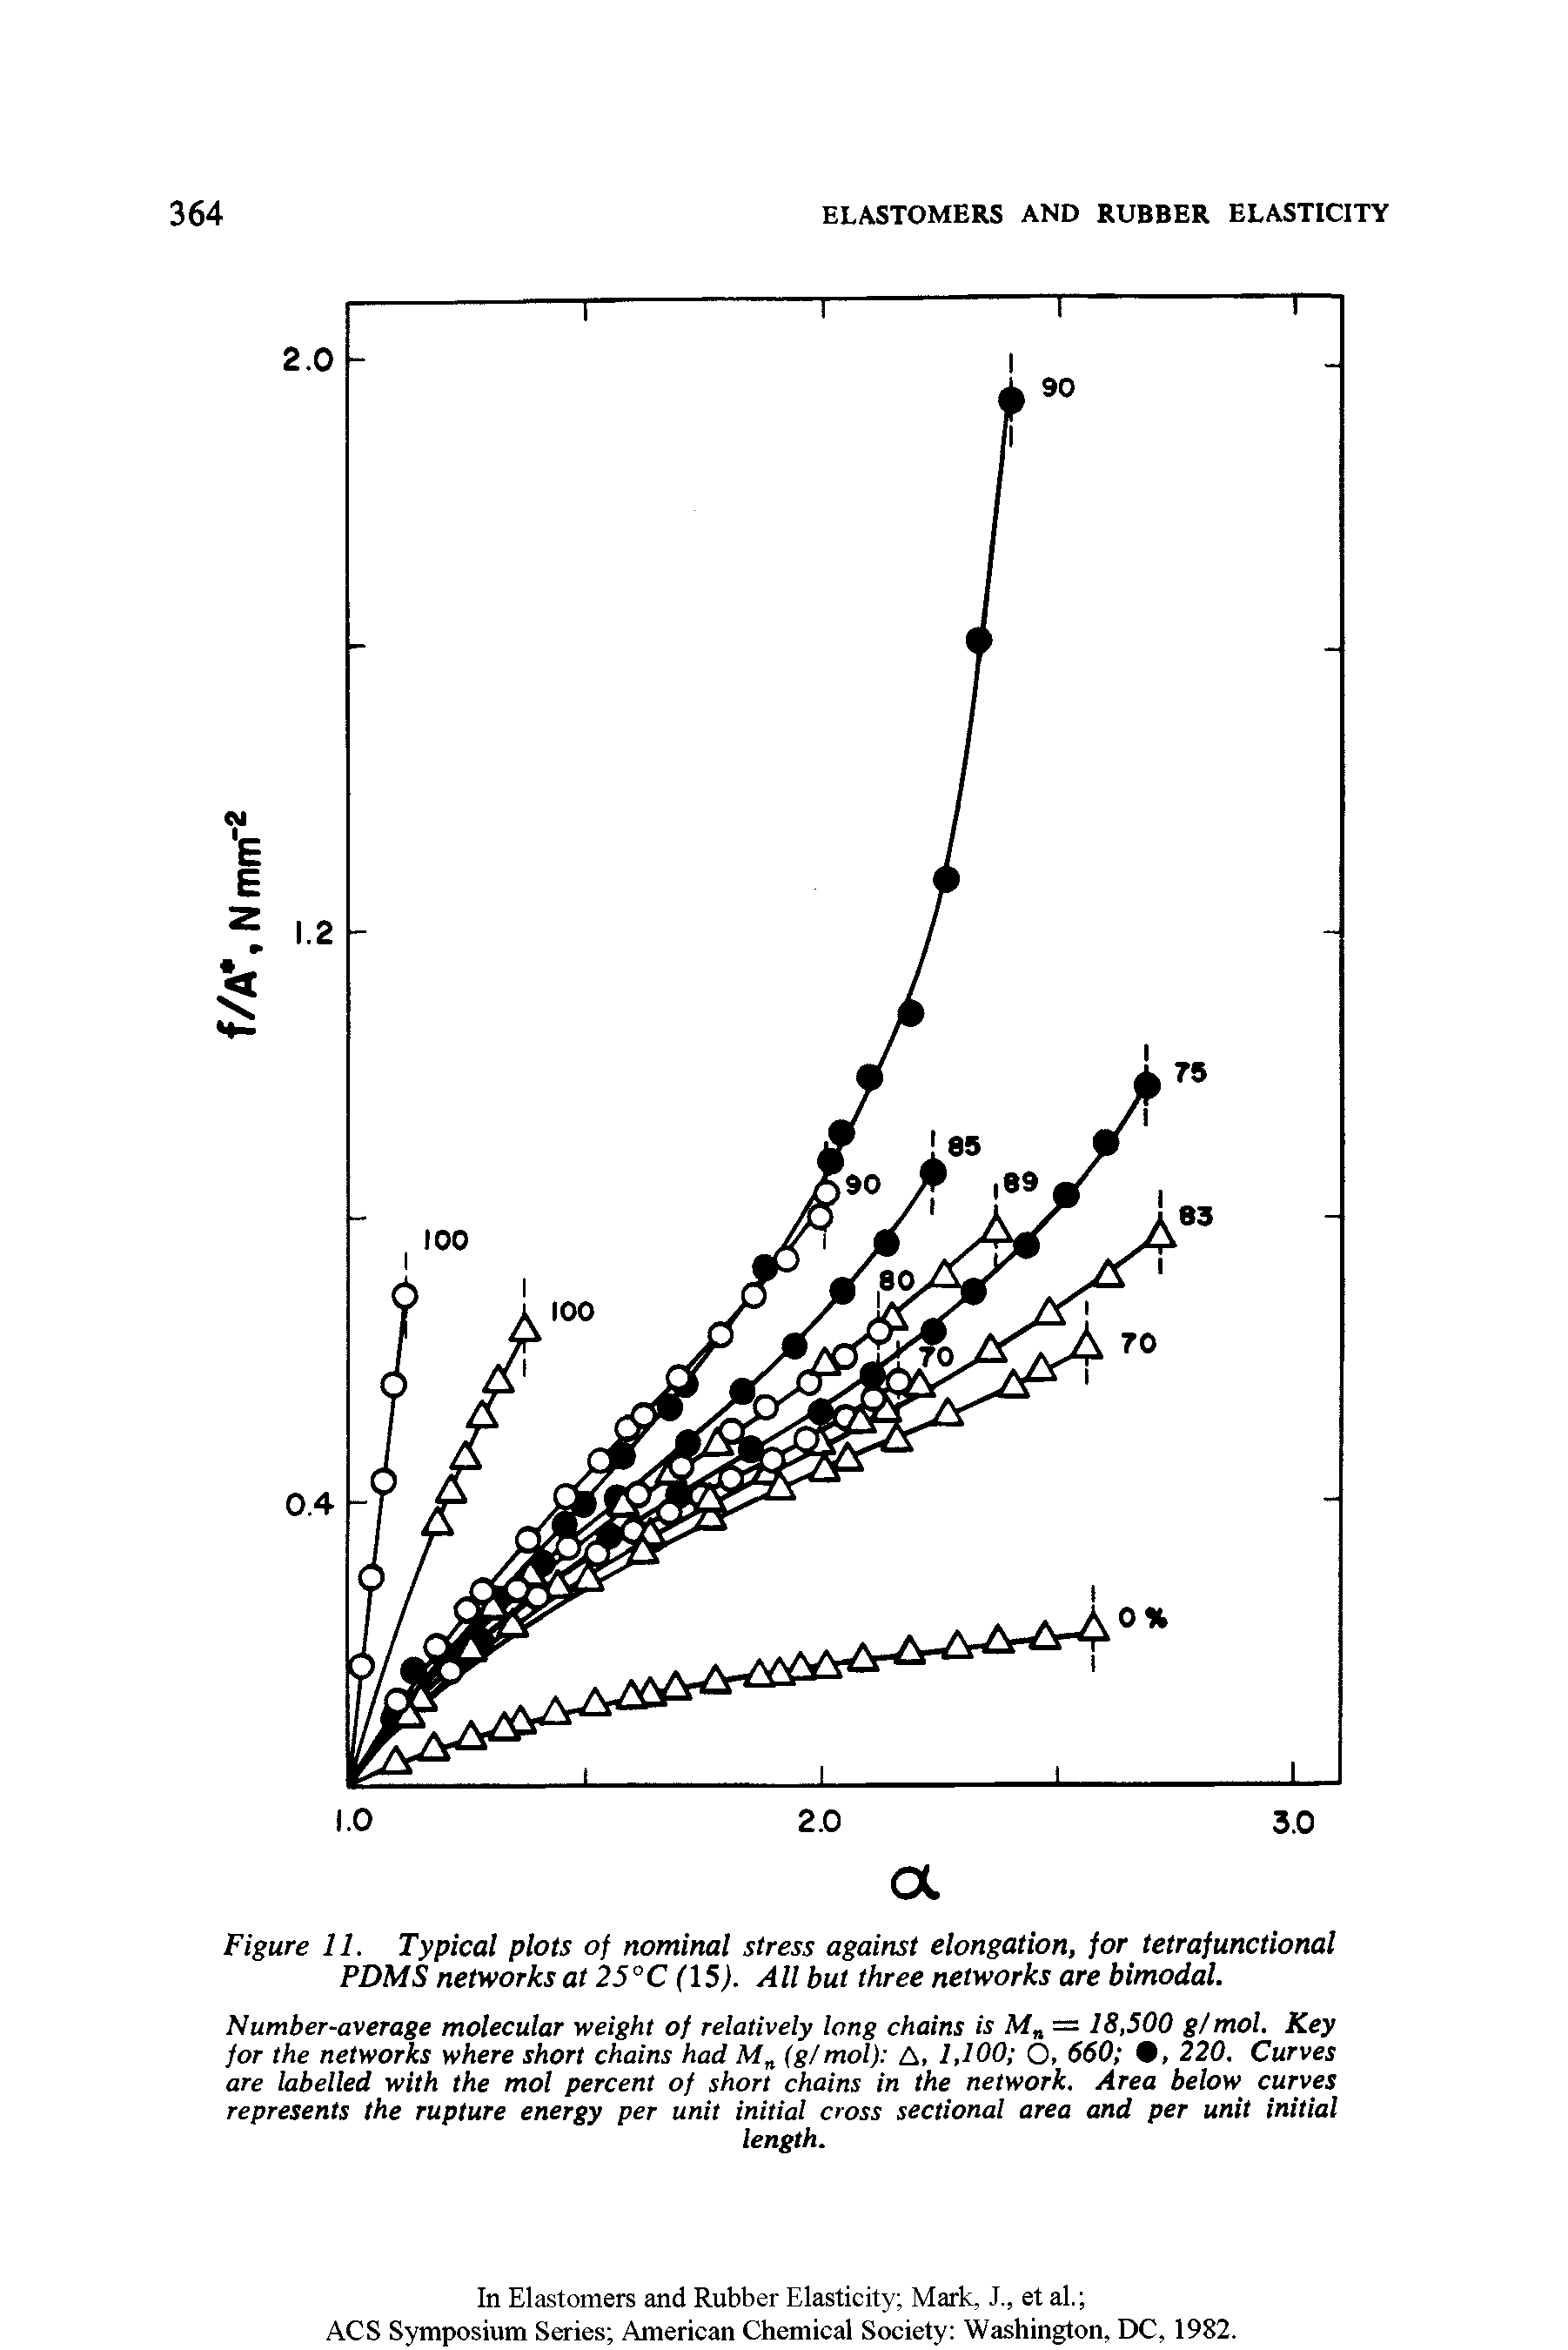 Figure 11. Typical plots of nominal stress against elongation, for tetrafunctional PDMS networks at 25°C (15). All but three networks are bimodal.